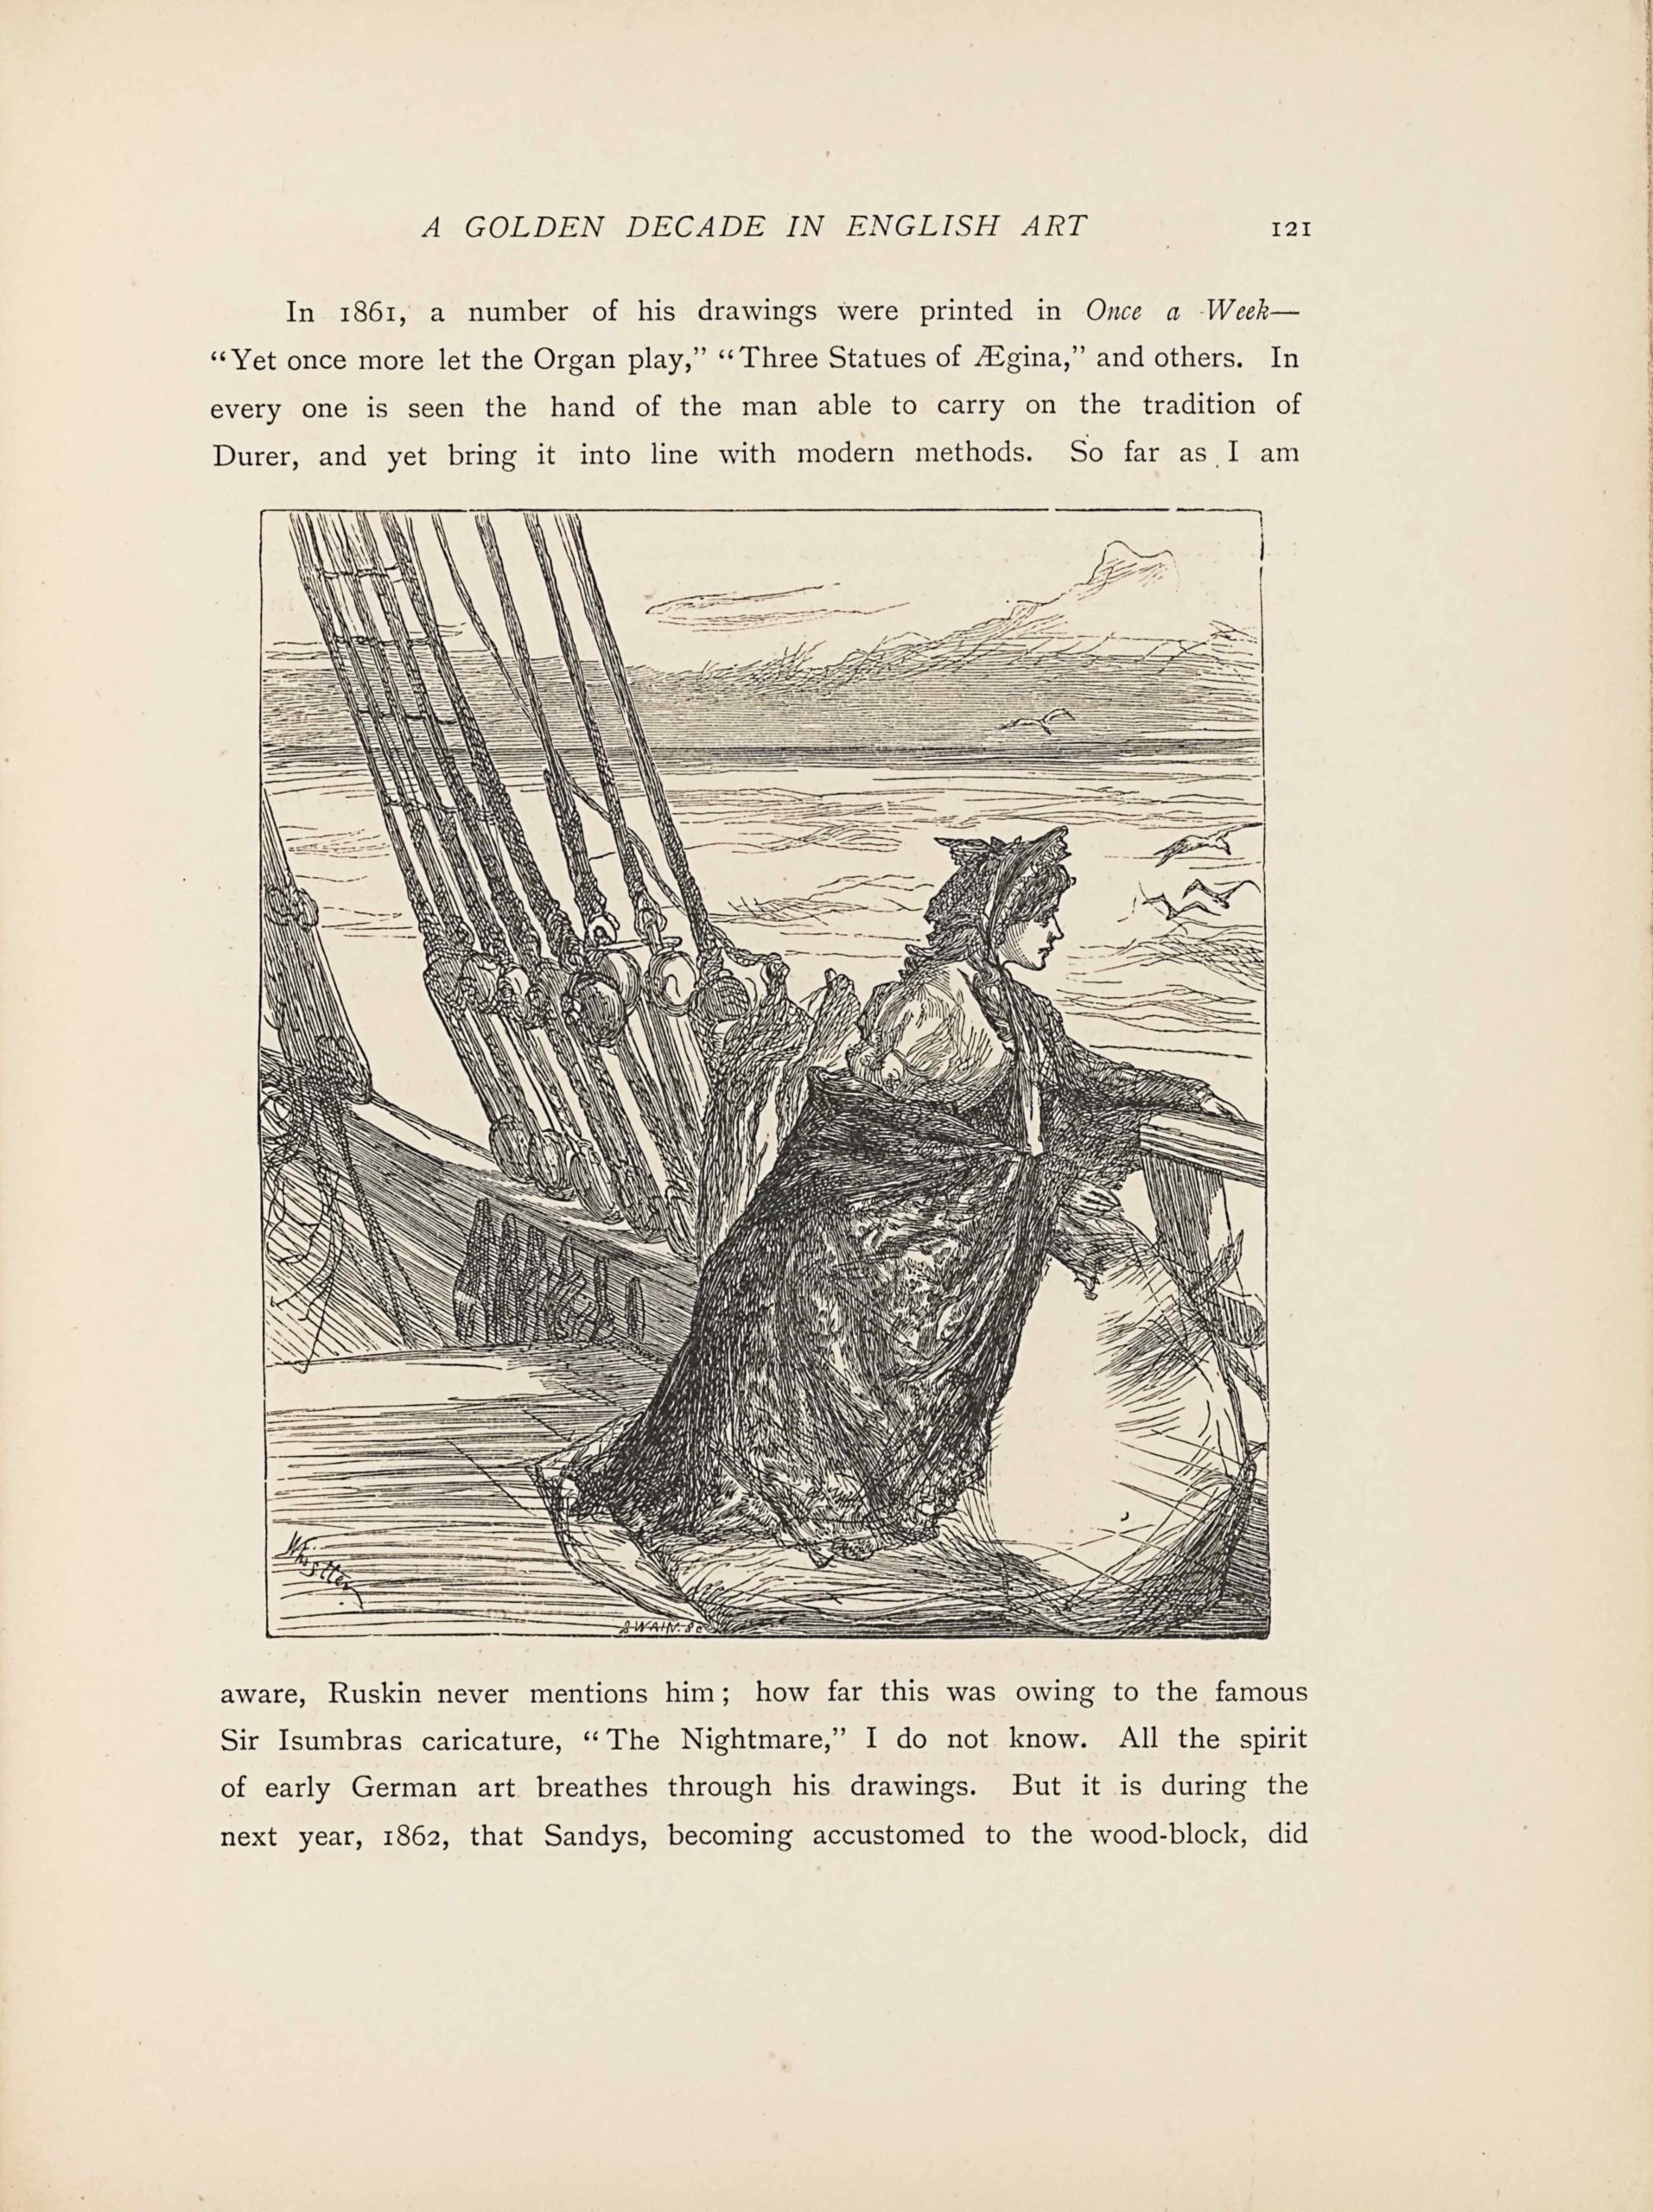 This line-block reproduction of a wood-engraved image is in portrait orientation. The image shows a woman seated on the deck of a ship in the water, with land in the distant horizon. The woman fills about the bottom right quadrant of the page. She sits facing the right side of the page, showing the profile of her face looking out to sea over the hull. She is wearing a large, light-coloured gown that puffs out into a big skirt. She has a dark shawl wrapped around her arms and the back of the skirt. One of her arms, the left, is leaning on the rail of the ship and the other is bent, holding up the shawl. She has on a bonnet that covers the back of her head and her bangs peek out from the front. The bonnet ties underneath her chin and the ties hang down the front of her dress. To the right of the woman’s face in the background appear four seagulls flying above the water and towards the skyline. The deck extends behind her. The railing continues towards the left side of the page upwards and diagonally. The ropes that hold the ship’s masts are tied off on the hooks that line the railing in the mid-ground and to the left of the woman. There are eight ropes that tie off, cutting vertically through the middle and left side of the page. The deck drops slightly lower after a few steps down and then continues out of sight towards the left. More ropes are shown attached to the distant railing but are mostly cut off from the frame on the left edge of the page. Behind the rail, ropes, and the woman is the watery background. The water rises to about three-quarters up the page, showing slight waves rising throughout. Behind the water the outline of a landscape appears lightly sketched to represent a body of land that has mountains and valleys. The sky has one sketched cloud and is above the land for a small portion of the page. The artist’s name, “Whistler,” appears scrawled in the bottom left corner of the page diagonally aimed down to the right, and the engraver’s signature, “Swain,” appears at centre bottom.